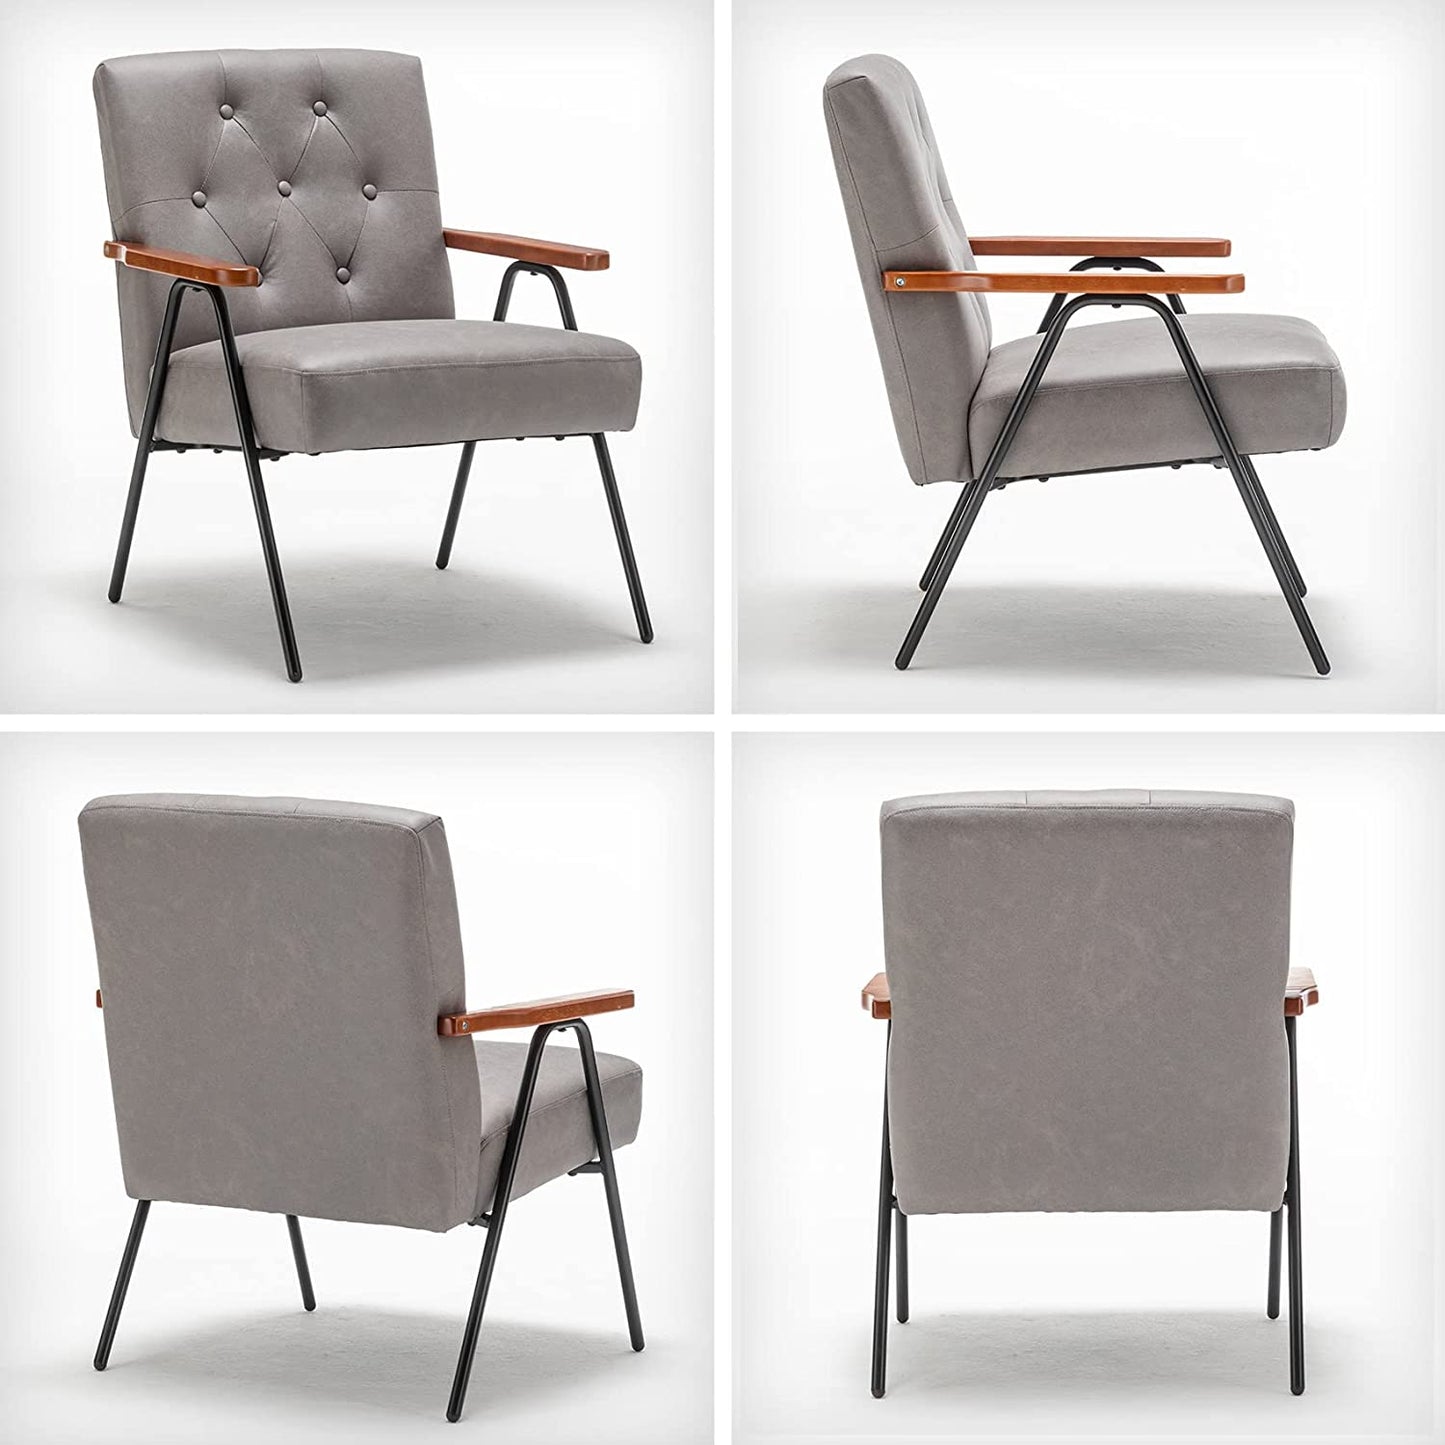 UNICOO - Modern Accent Chairs, Mid-Century Armchair Living Room Chairs Leisure Chair with Metal Legs Reception Side Chairs (ZKL-222K)